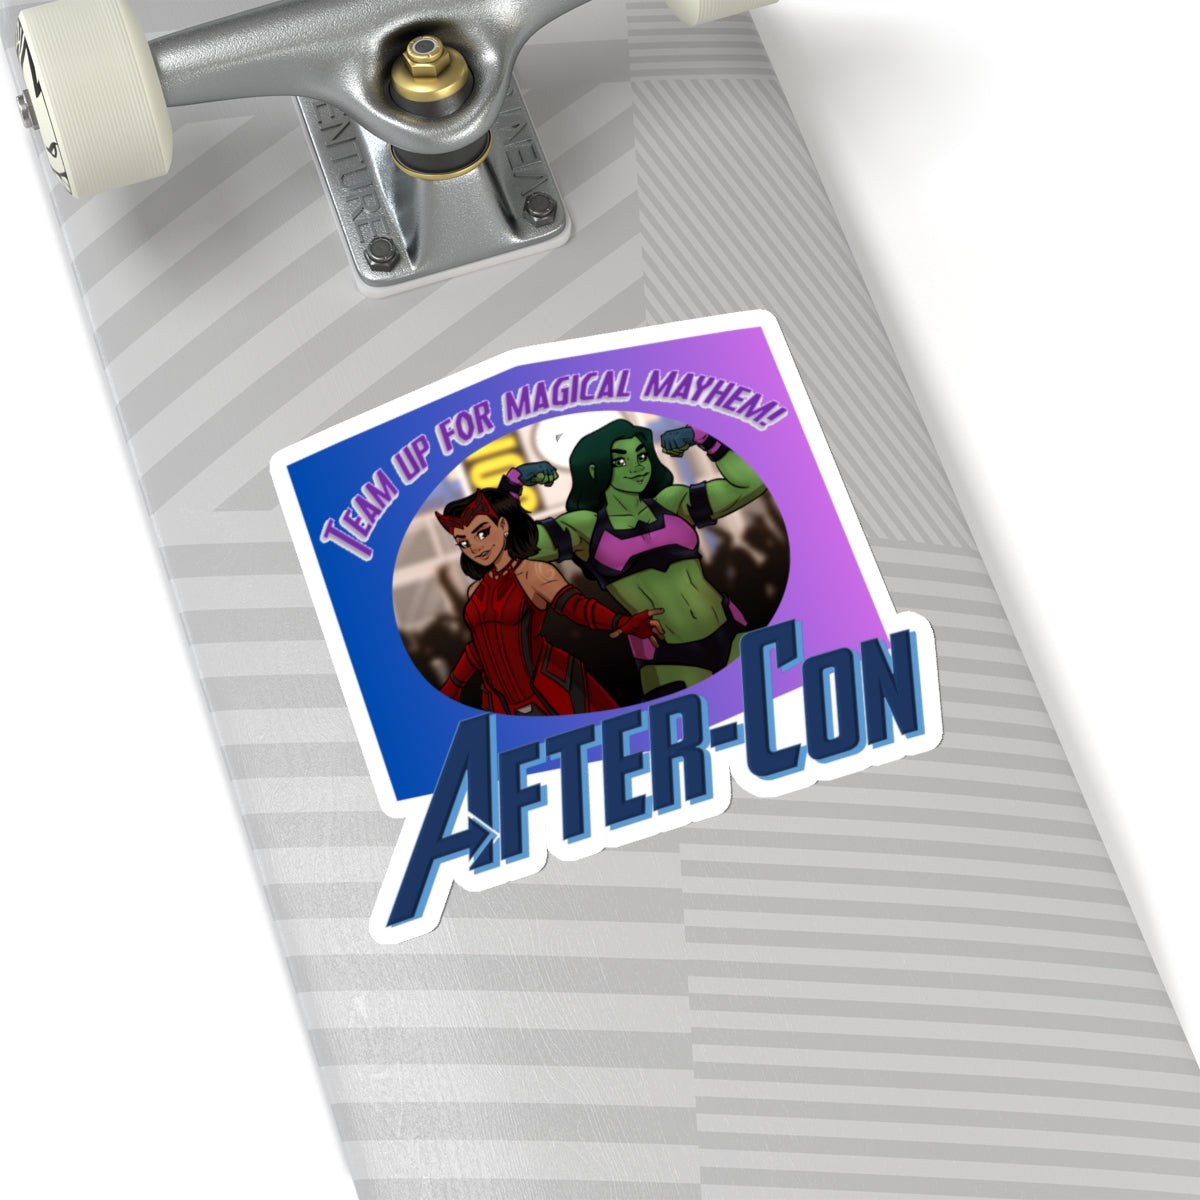 After-Con "Team Up" Kiss-Cut Stickers